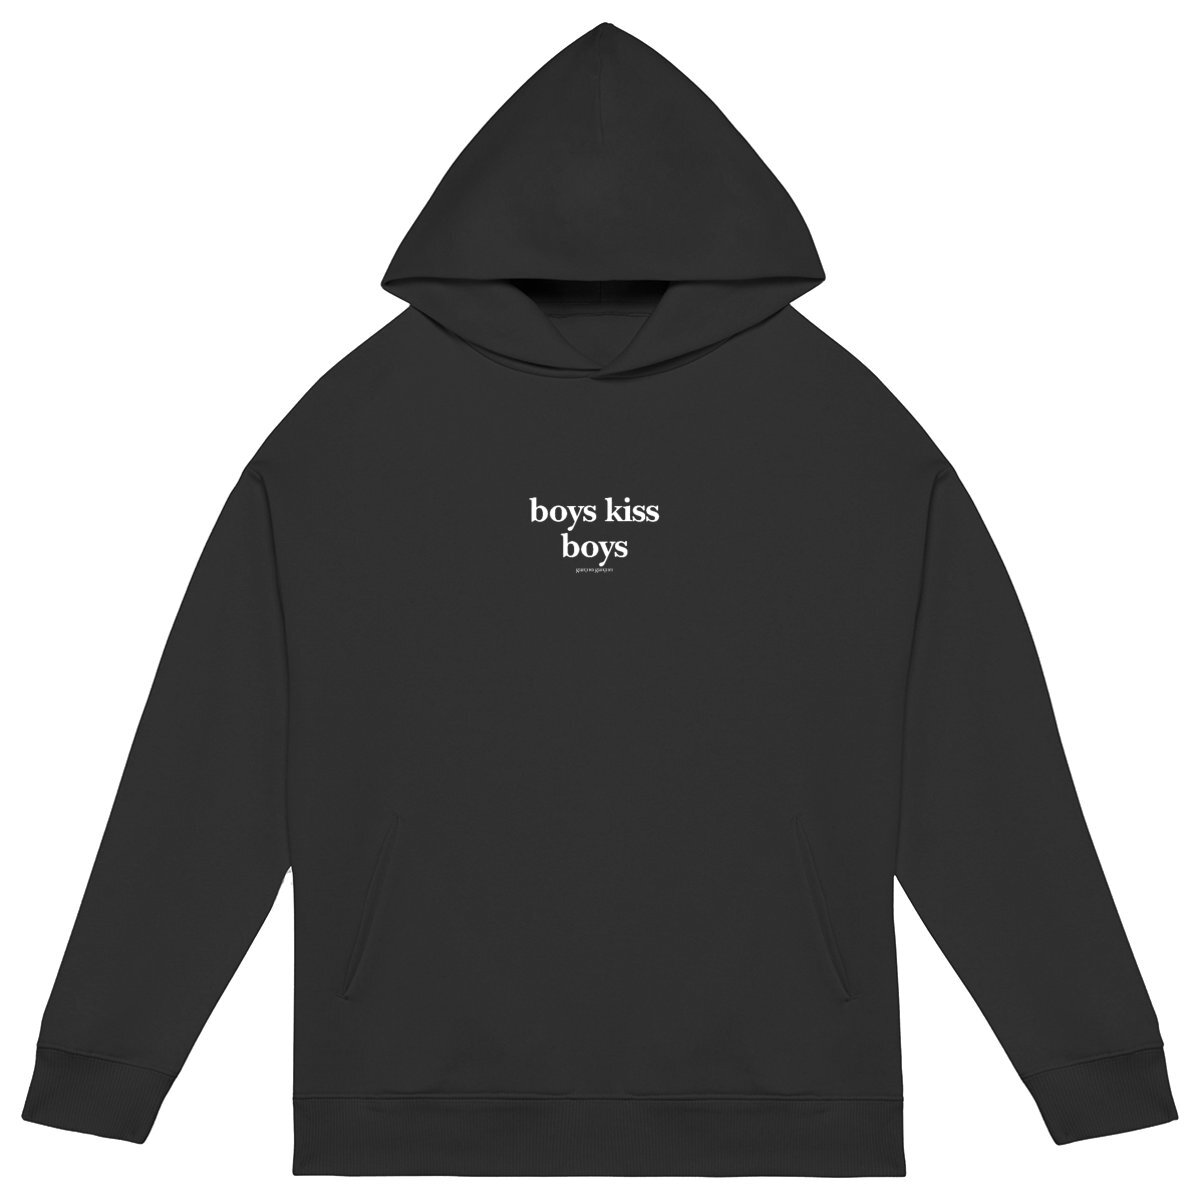 boys kiss boys hoodie over. garçon garçon essentiel oversized hoodie. Sleek in black and whispering Parisian chic, this hoodie is the sartorial whisper of 'garçon garçon' — a statement of understated elegance. Perfect for those who carry a piece of Paris in their hearts and a touch of audacity on their sleeves.